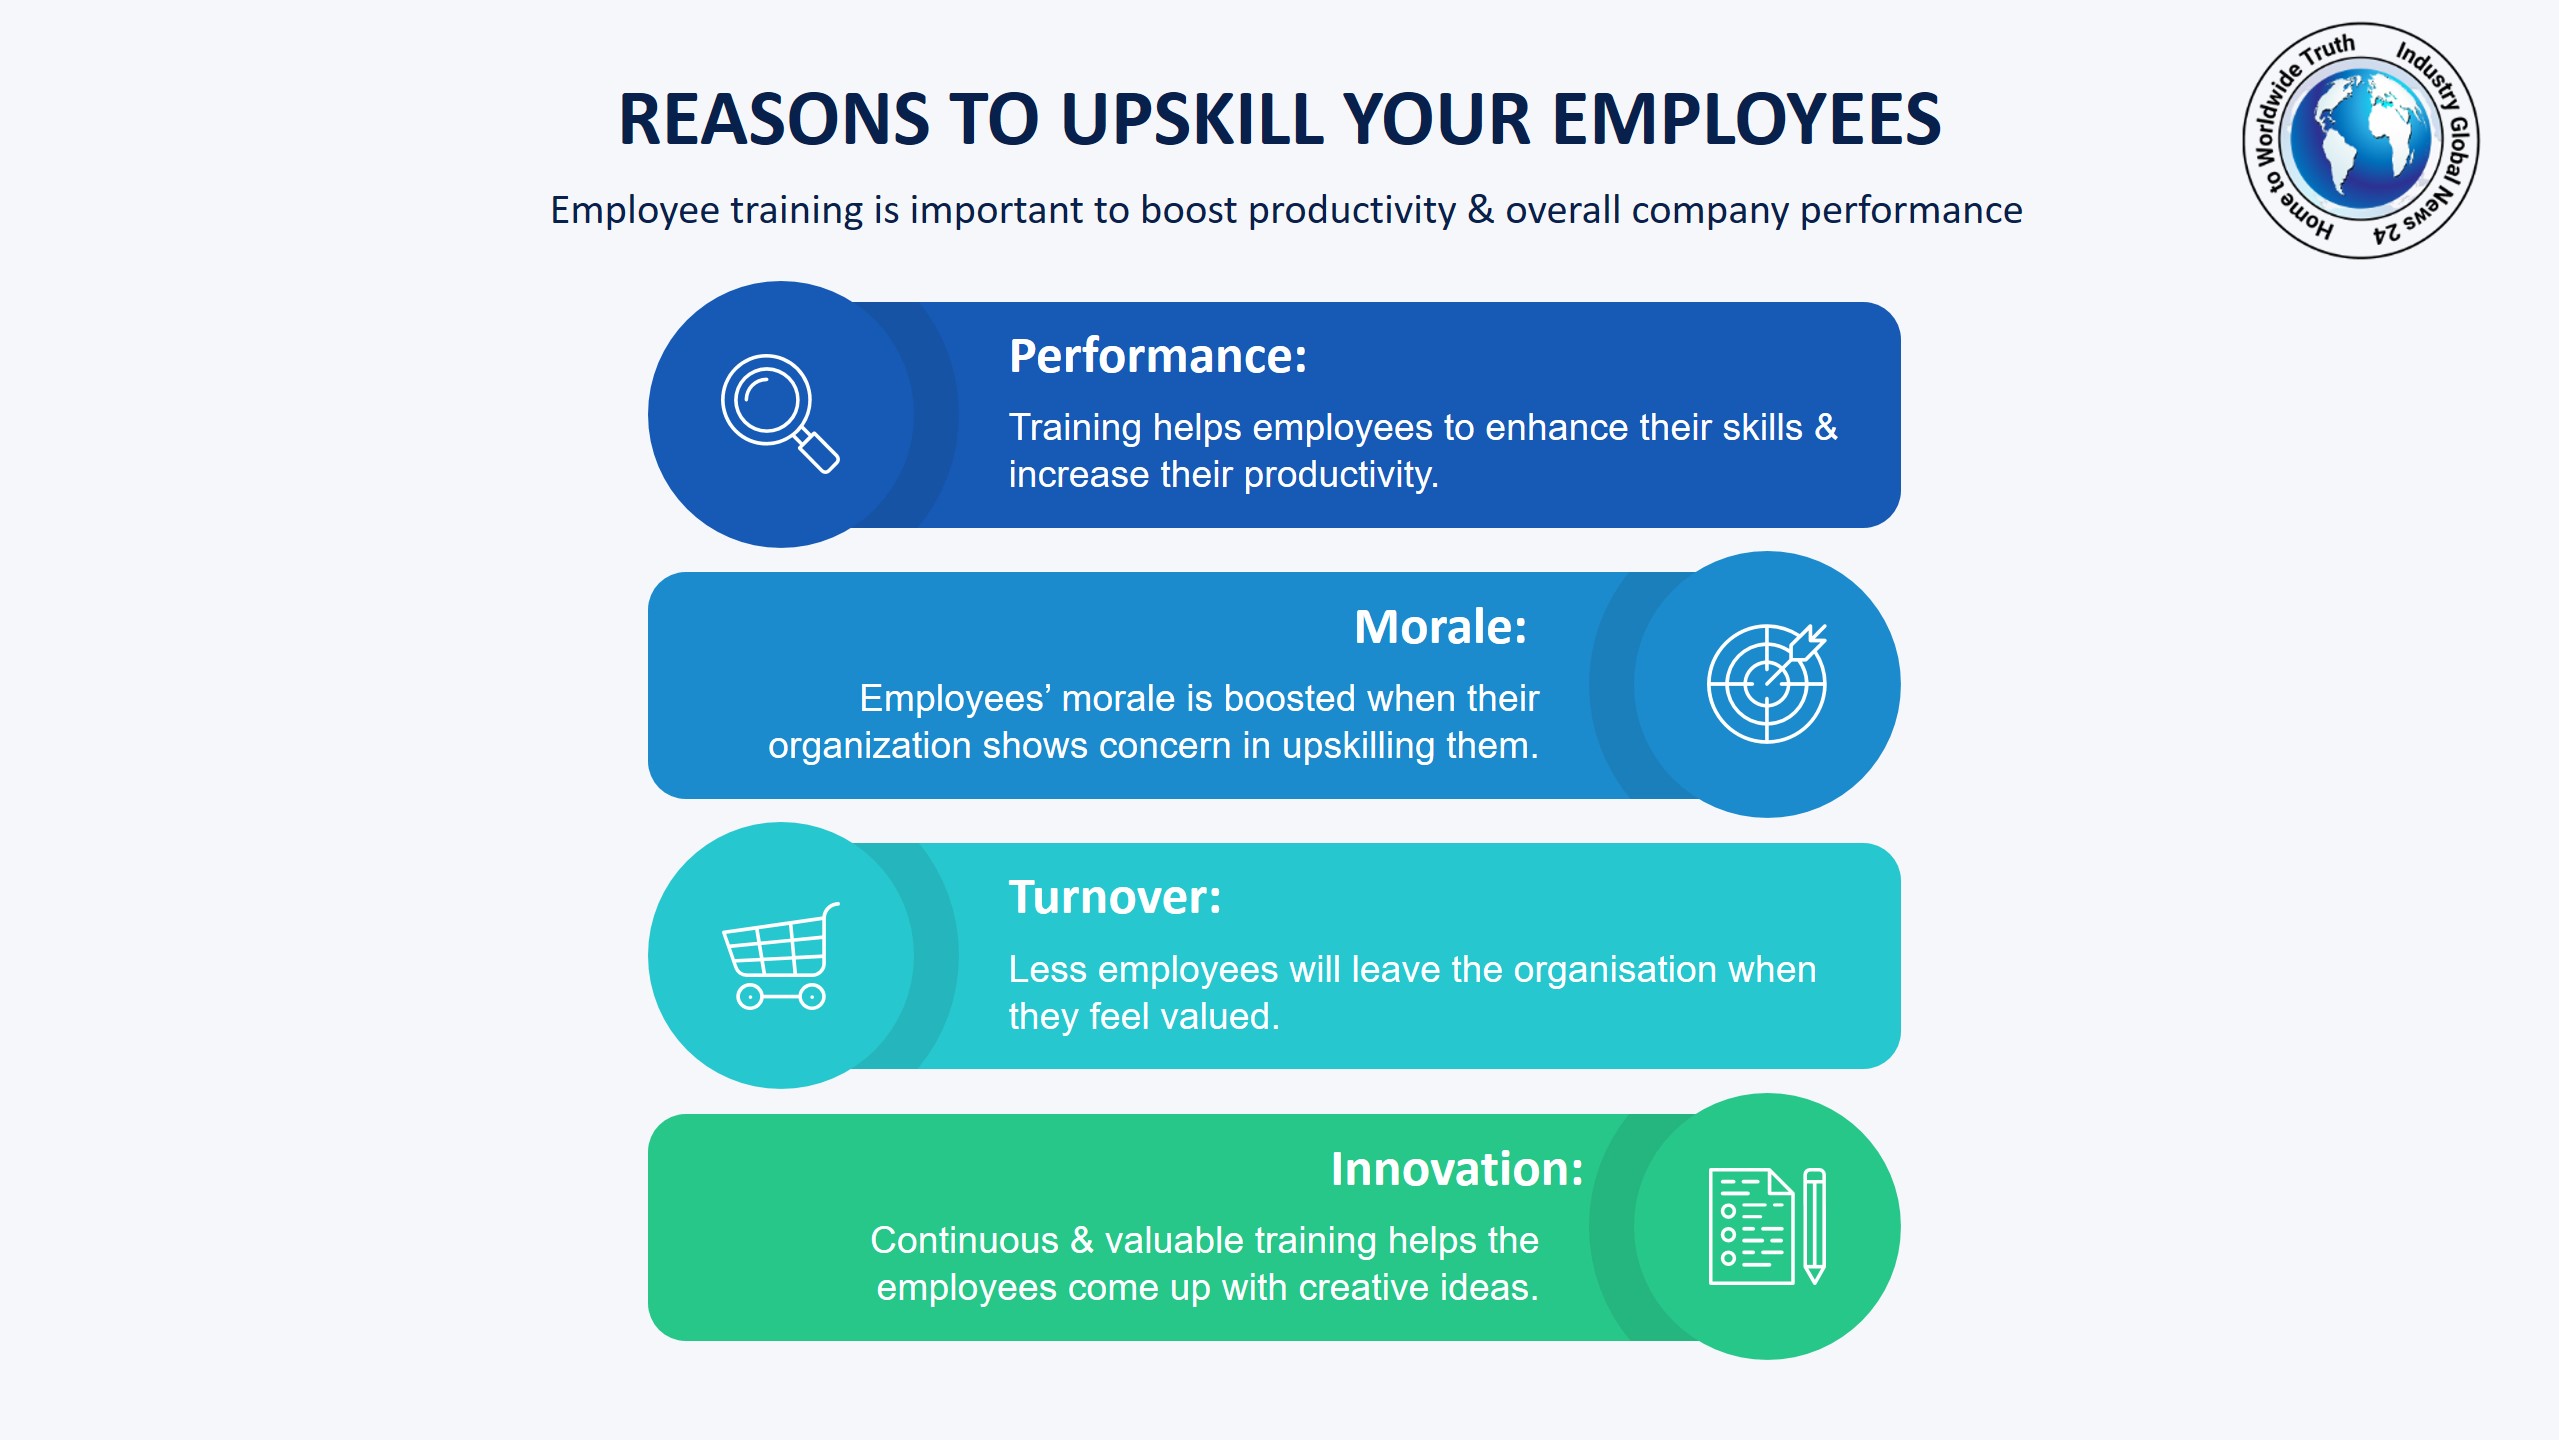 Reasons to upskill your employees